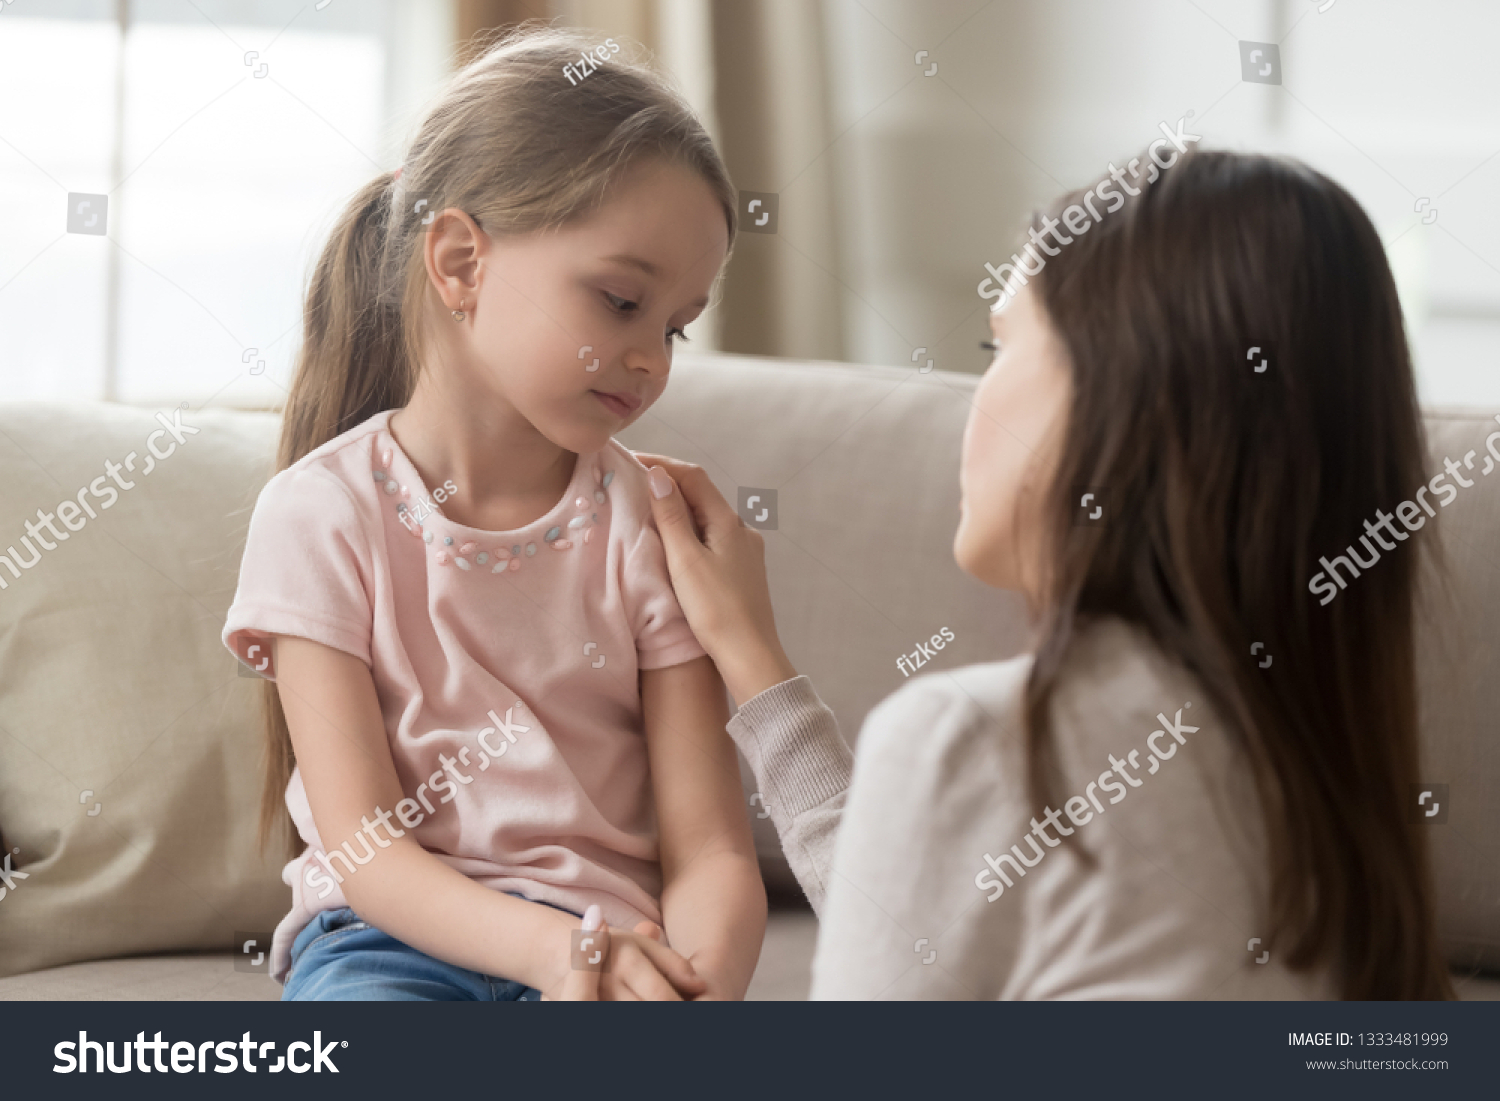 Loving worried mom psychologist consoling counseling talking to upset little child girl showing care give love support, single parent mother comforting sad small sullen kid daughter feeling offended #1333481999